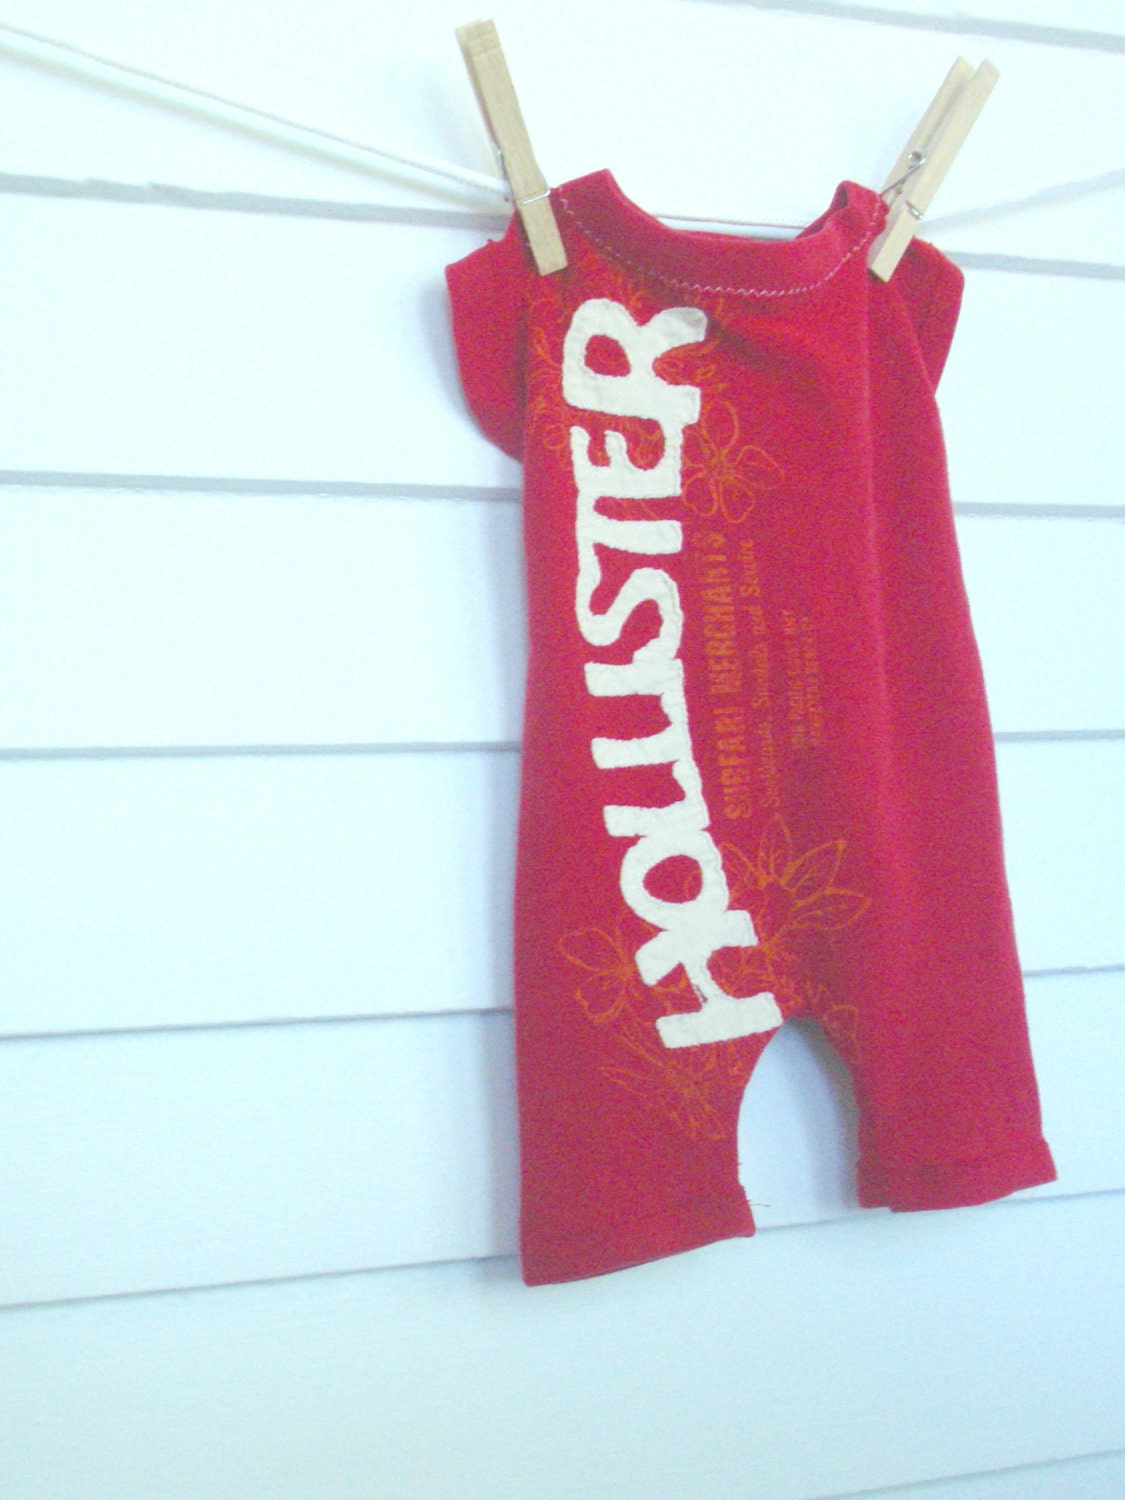 Newborn- 3 months Boys Shorty Romper Outfit, Upcycled T-Shirt, Hollister - SilkPurseVintUpcycle